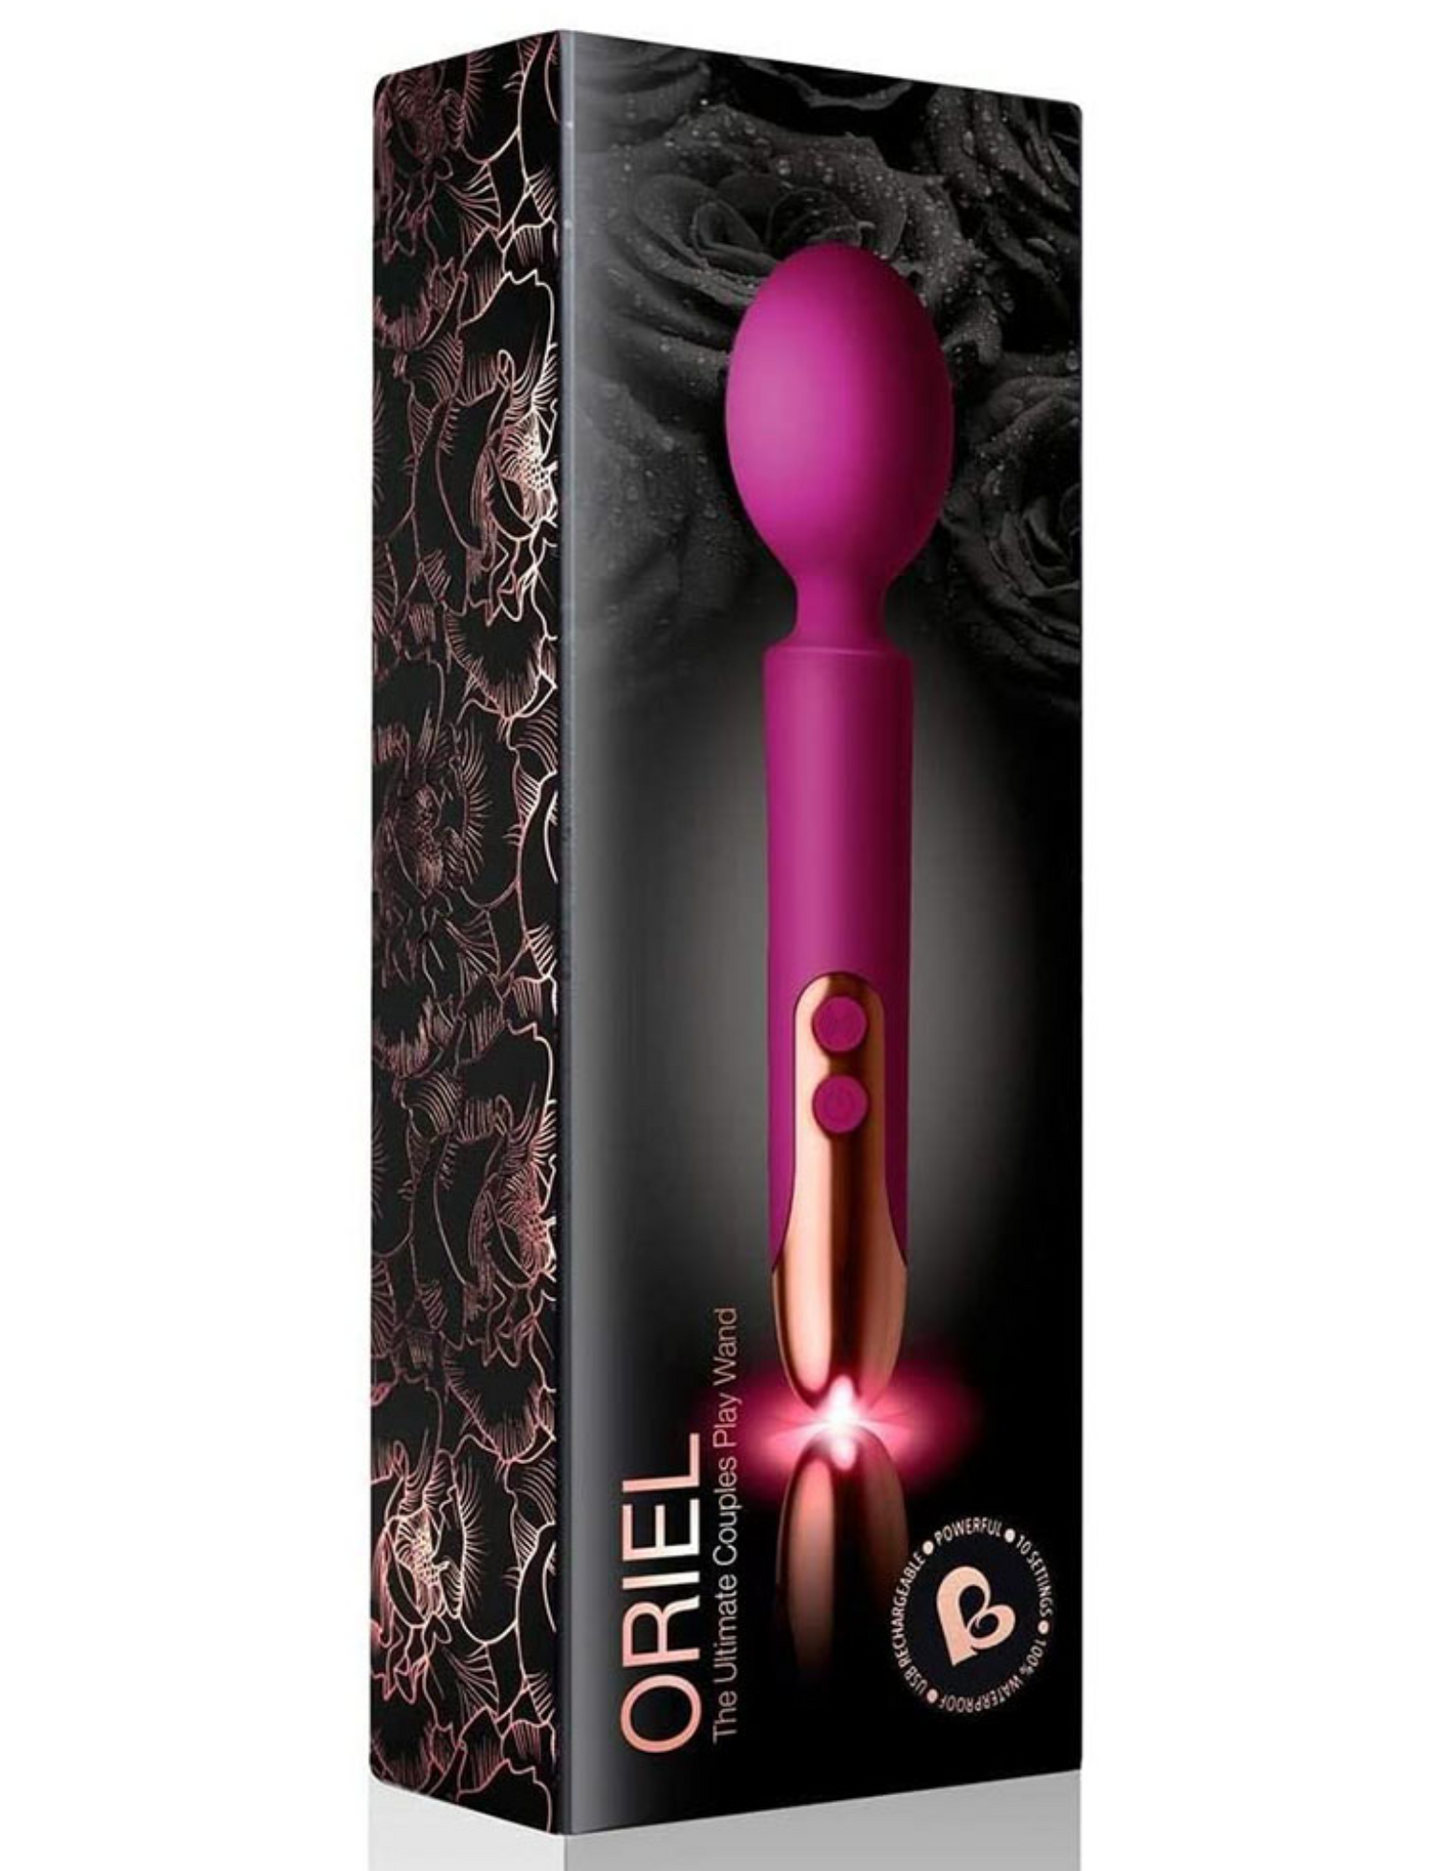 Photo of the front of the box for the Oriel Wand Massager from Rocks Off (magenta).